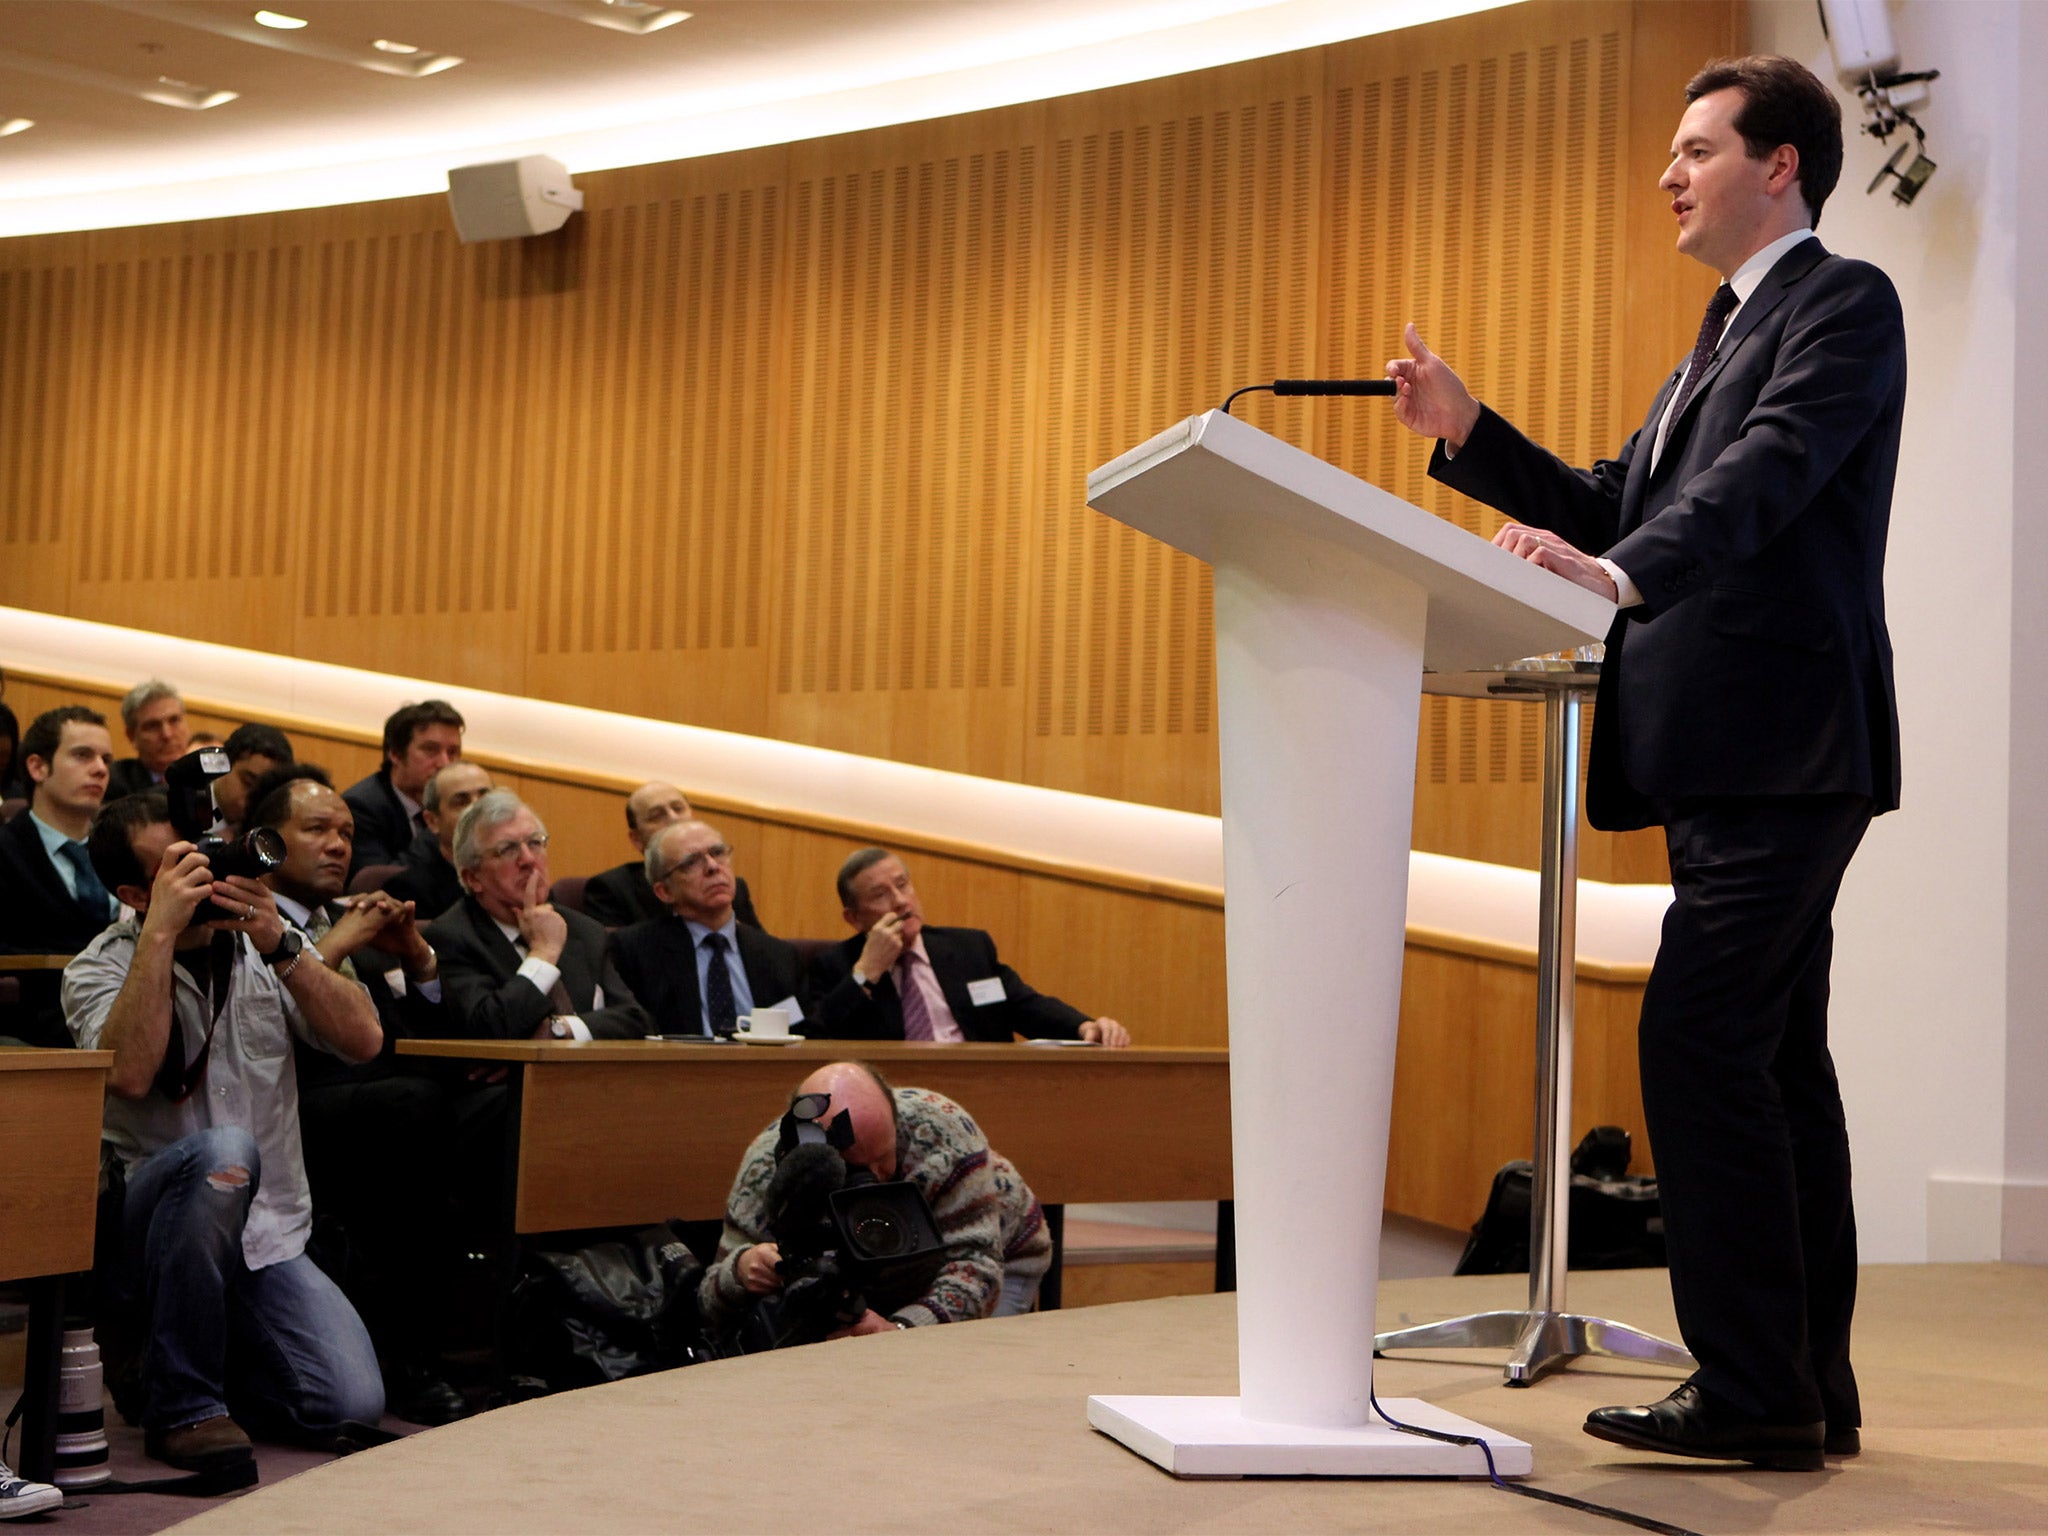 Hostage to fortune? George Osborne gives the Mais lecture at the Cass Business School, February 2010